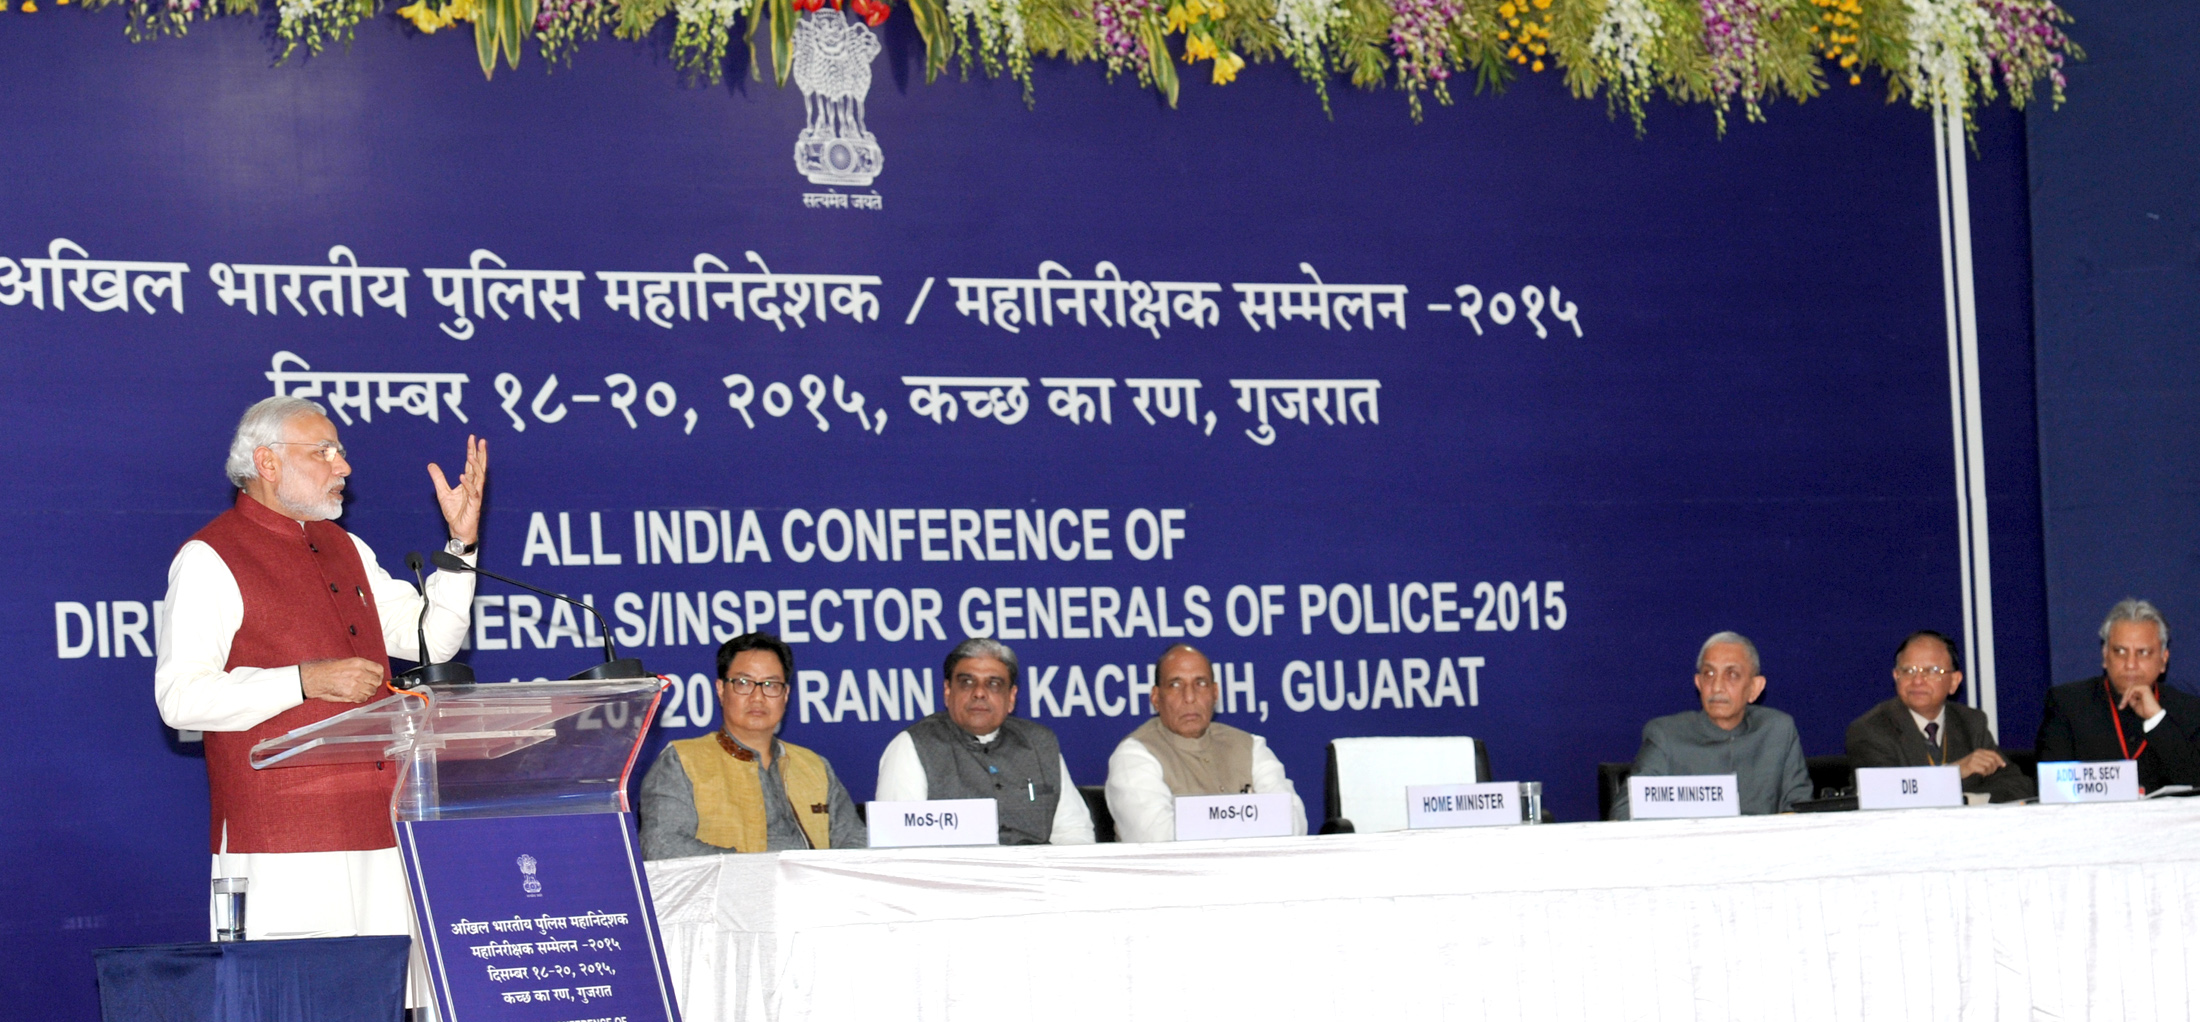 The Prime Minister, Shri Narendra Modi delivering his address on the 3rd and concluding day of the Conference of DGPs, at Dhordo, Kutch, Gujarat on December 20, 2015,  	The Union Home Minister, Shri Rajnath Singh, the Ministers of State for Home Affairs, Shri Kiren Rijiju and Shri Haribhai Parthibhai Chaudhary are also seen.